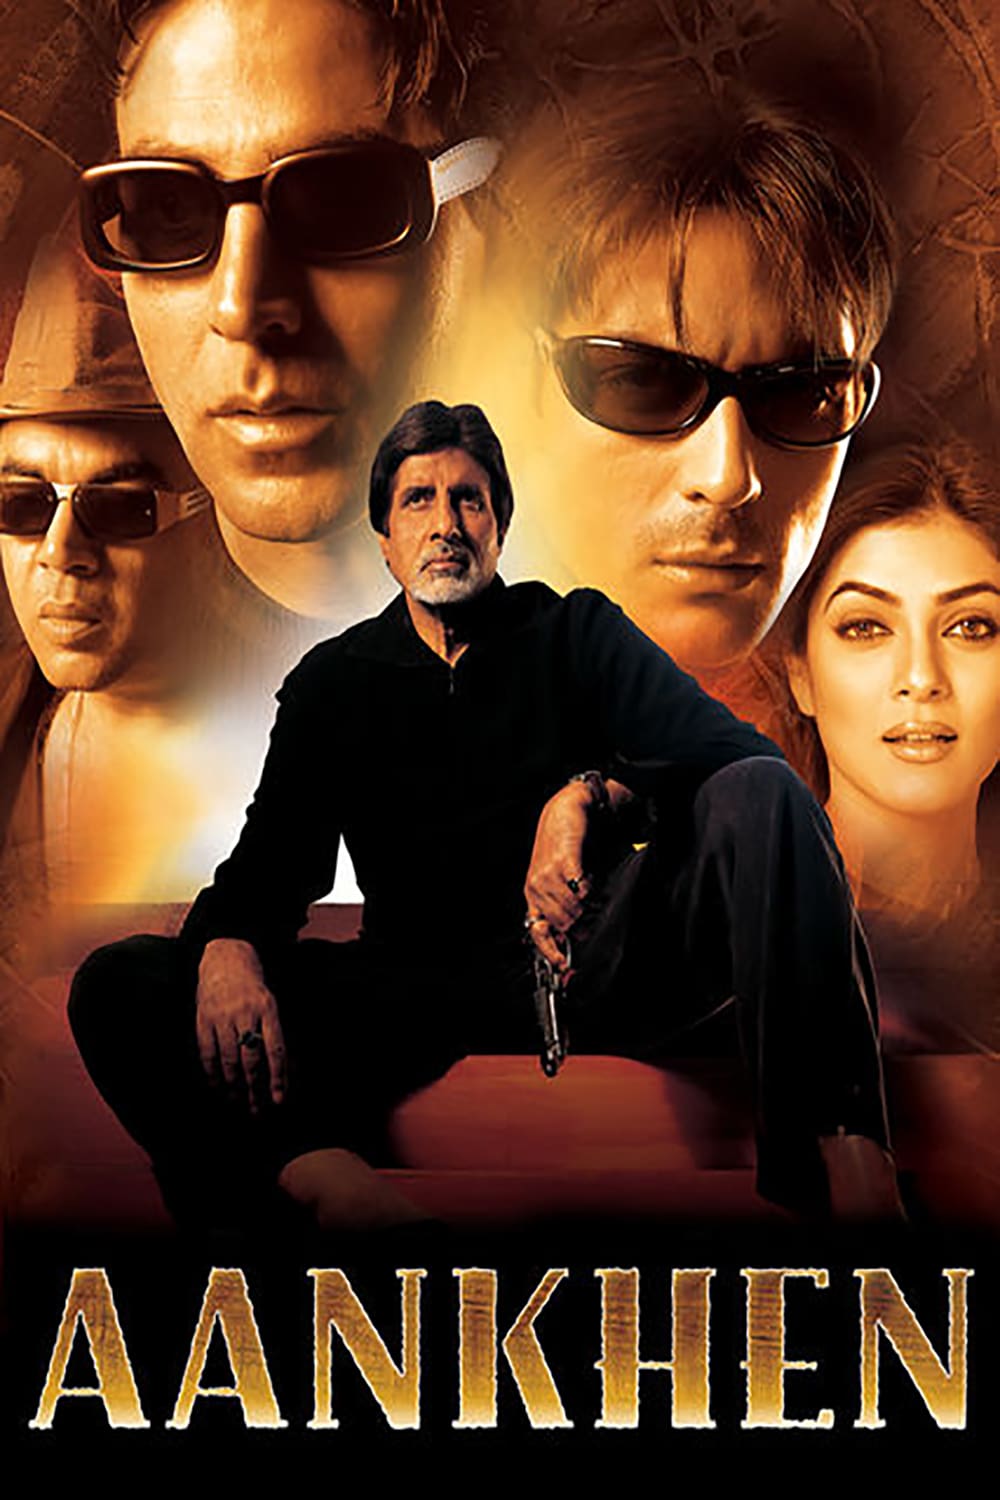 Poster for the movie "Aankhen"